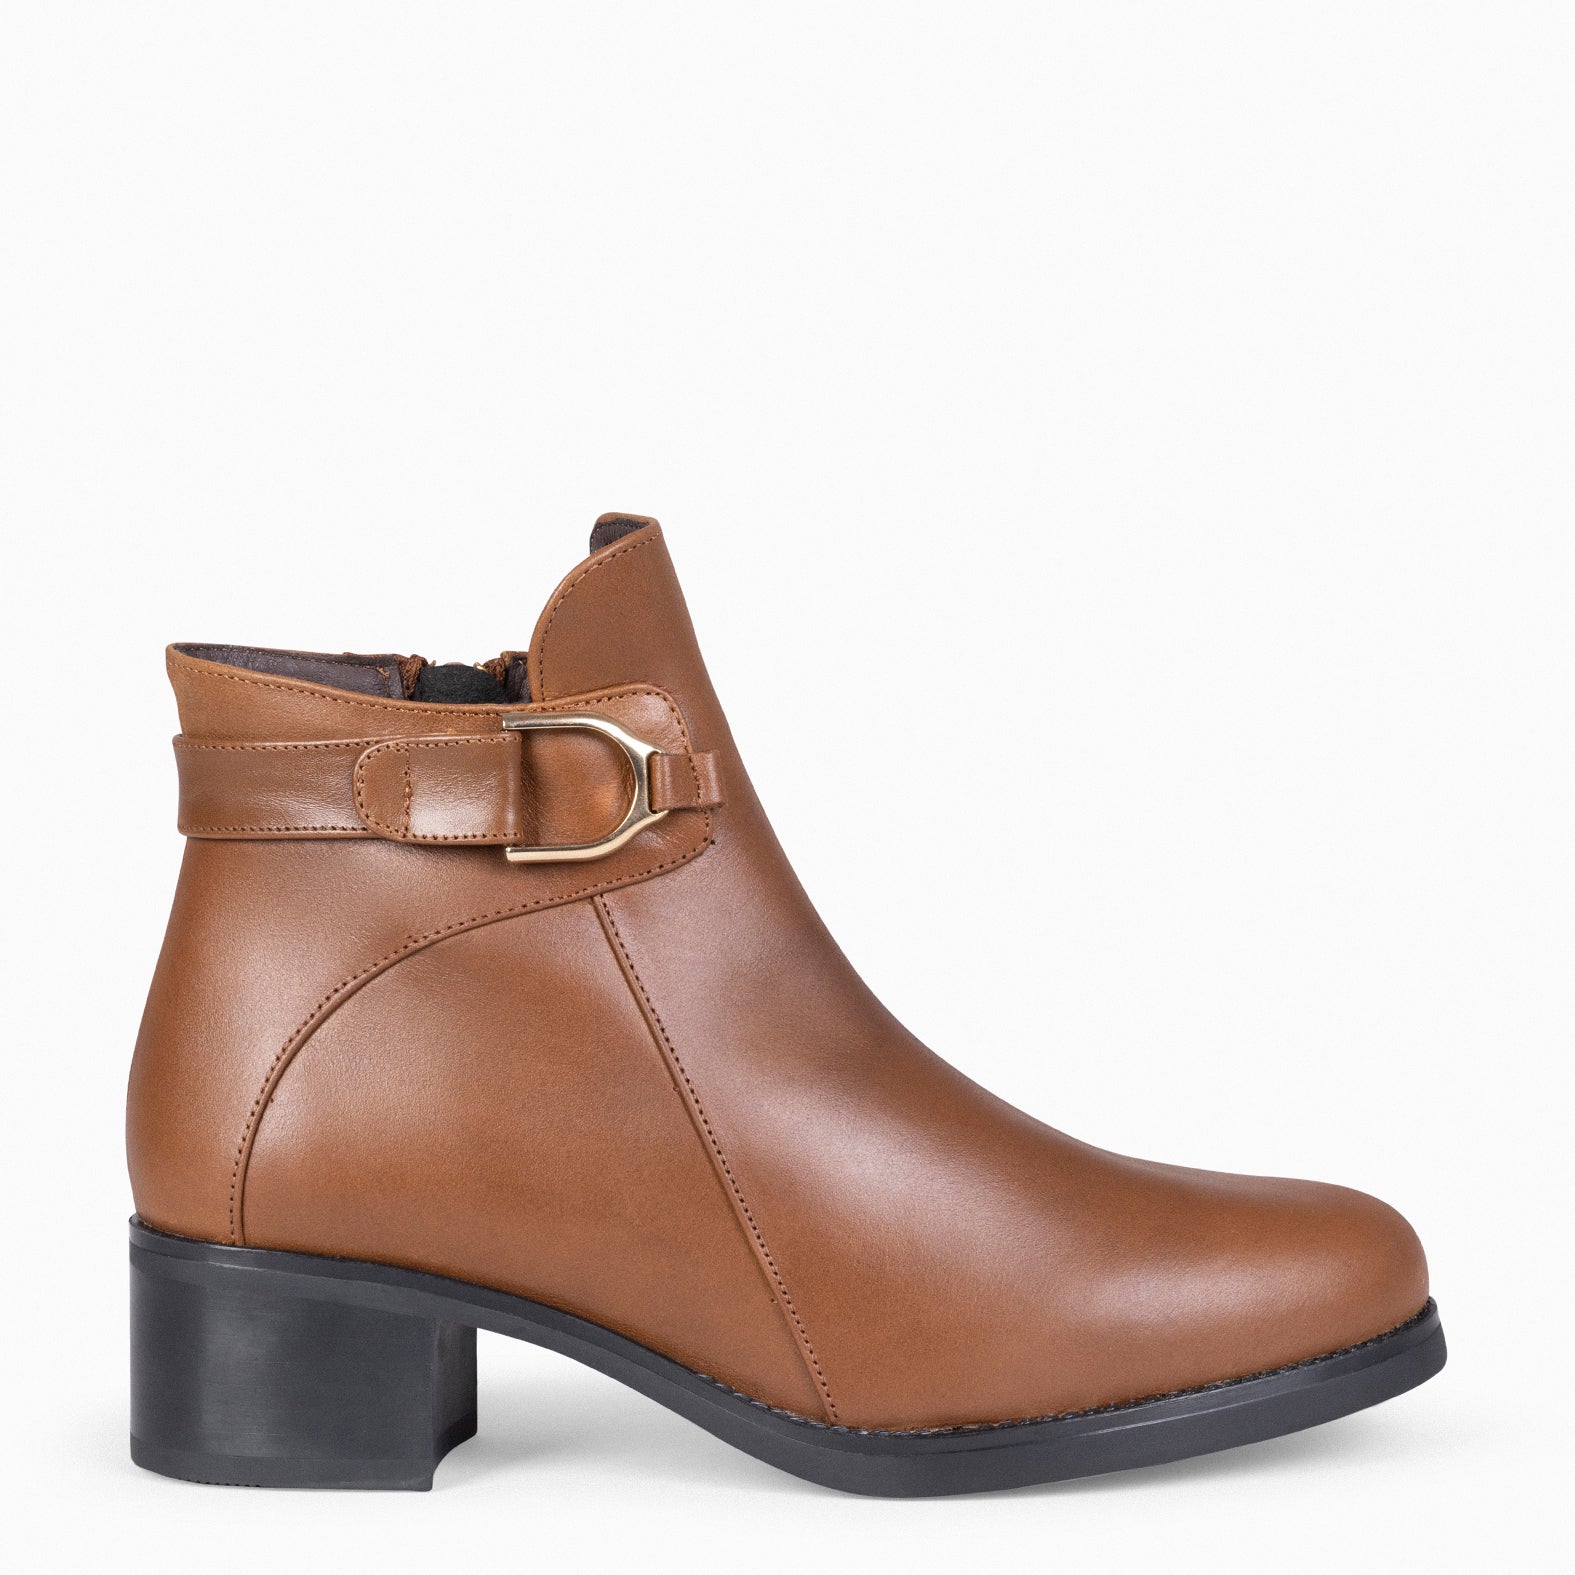 CARDIFF – CAMEL Women leather booties 